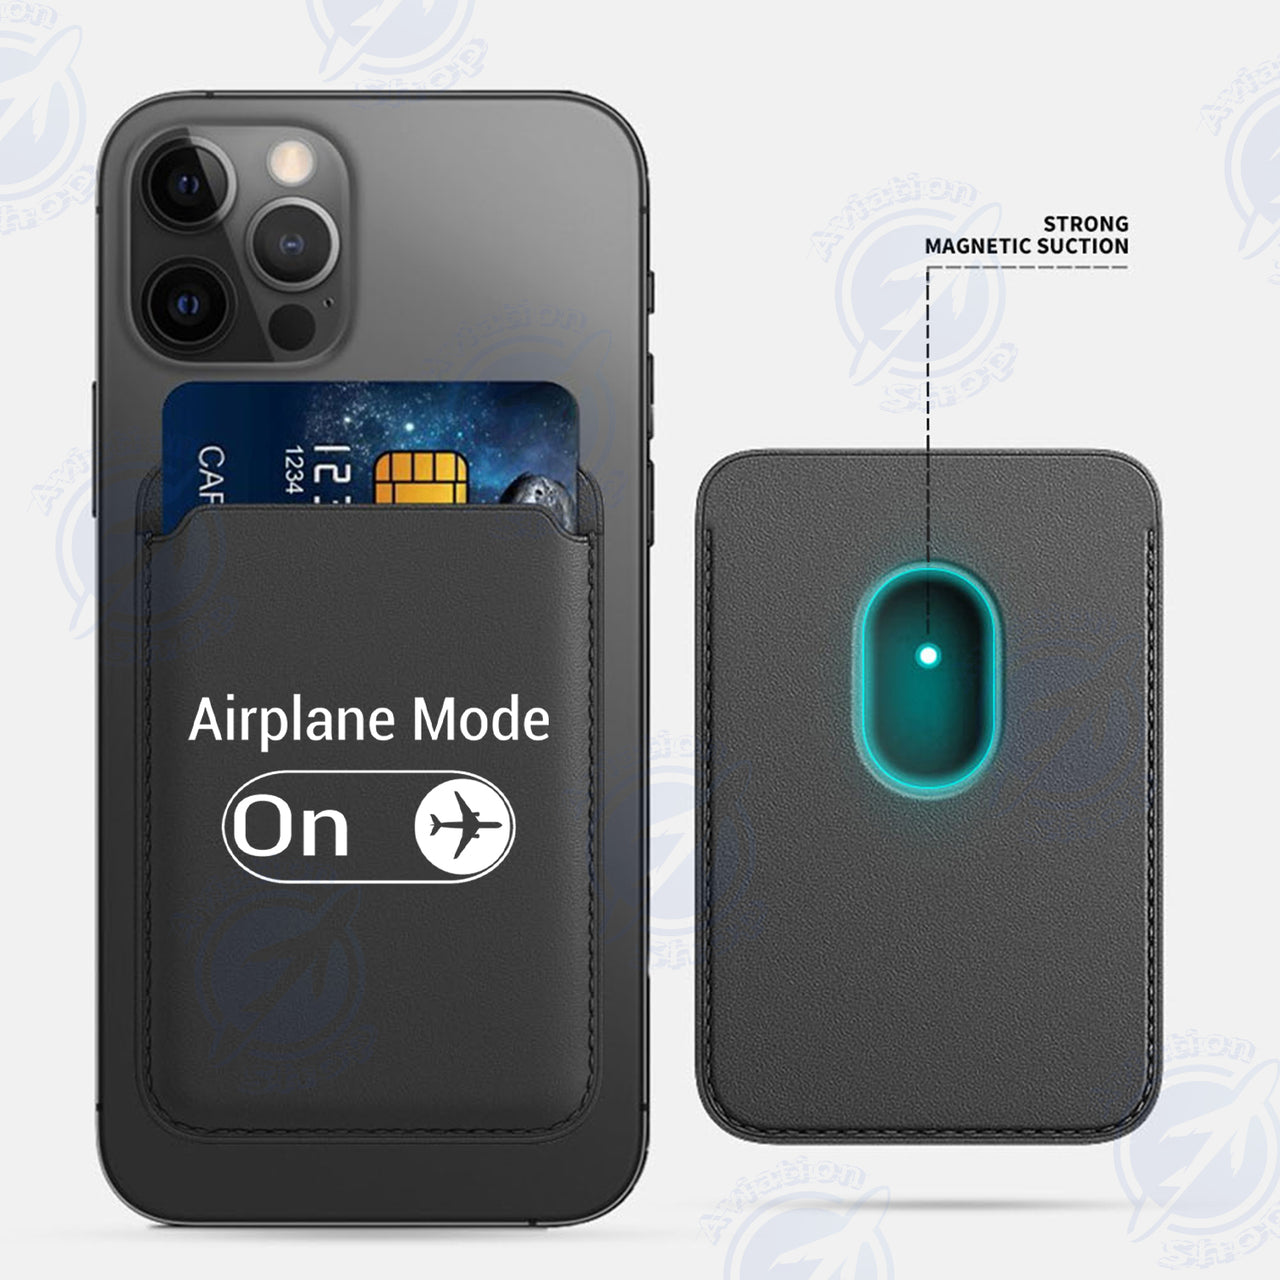 Airplane Mode On iPhone Cases Magnetic Card Wallet